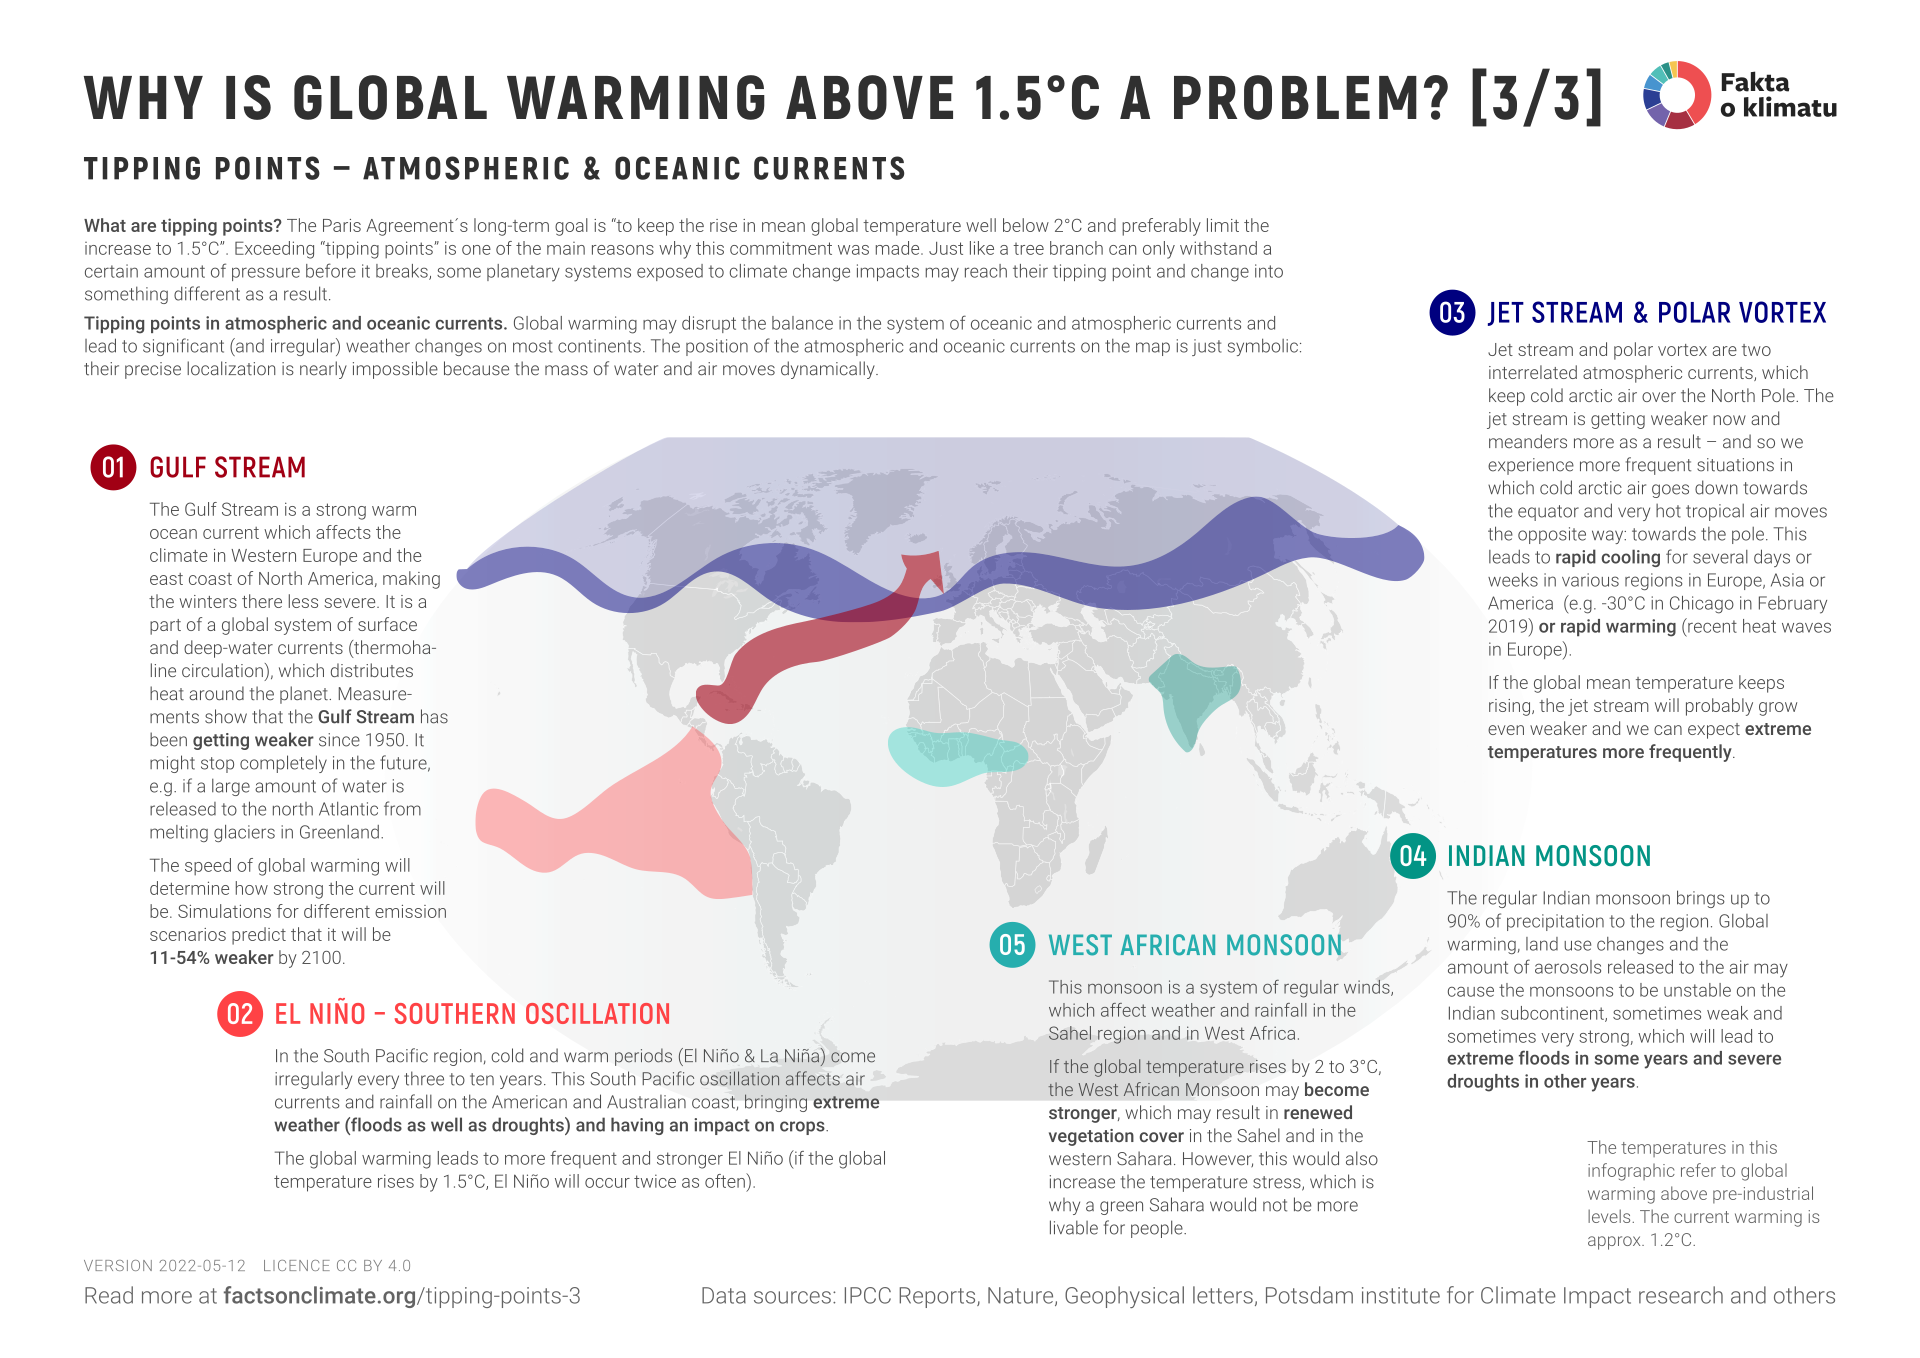 Why is global warming above 1.5 °C a problem? [3/3]